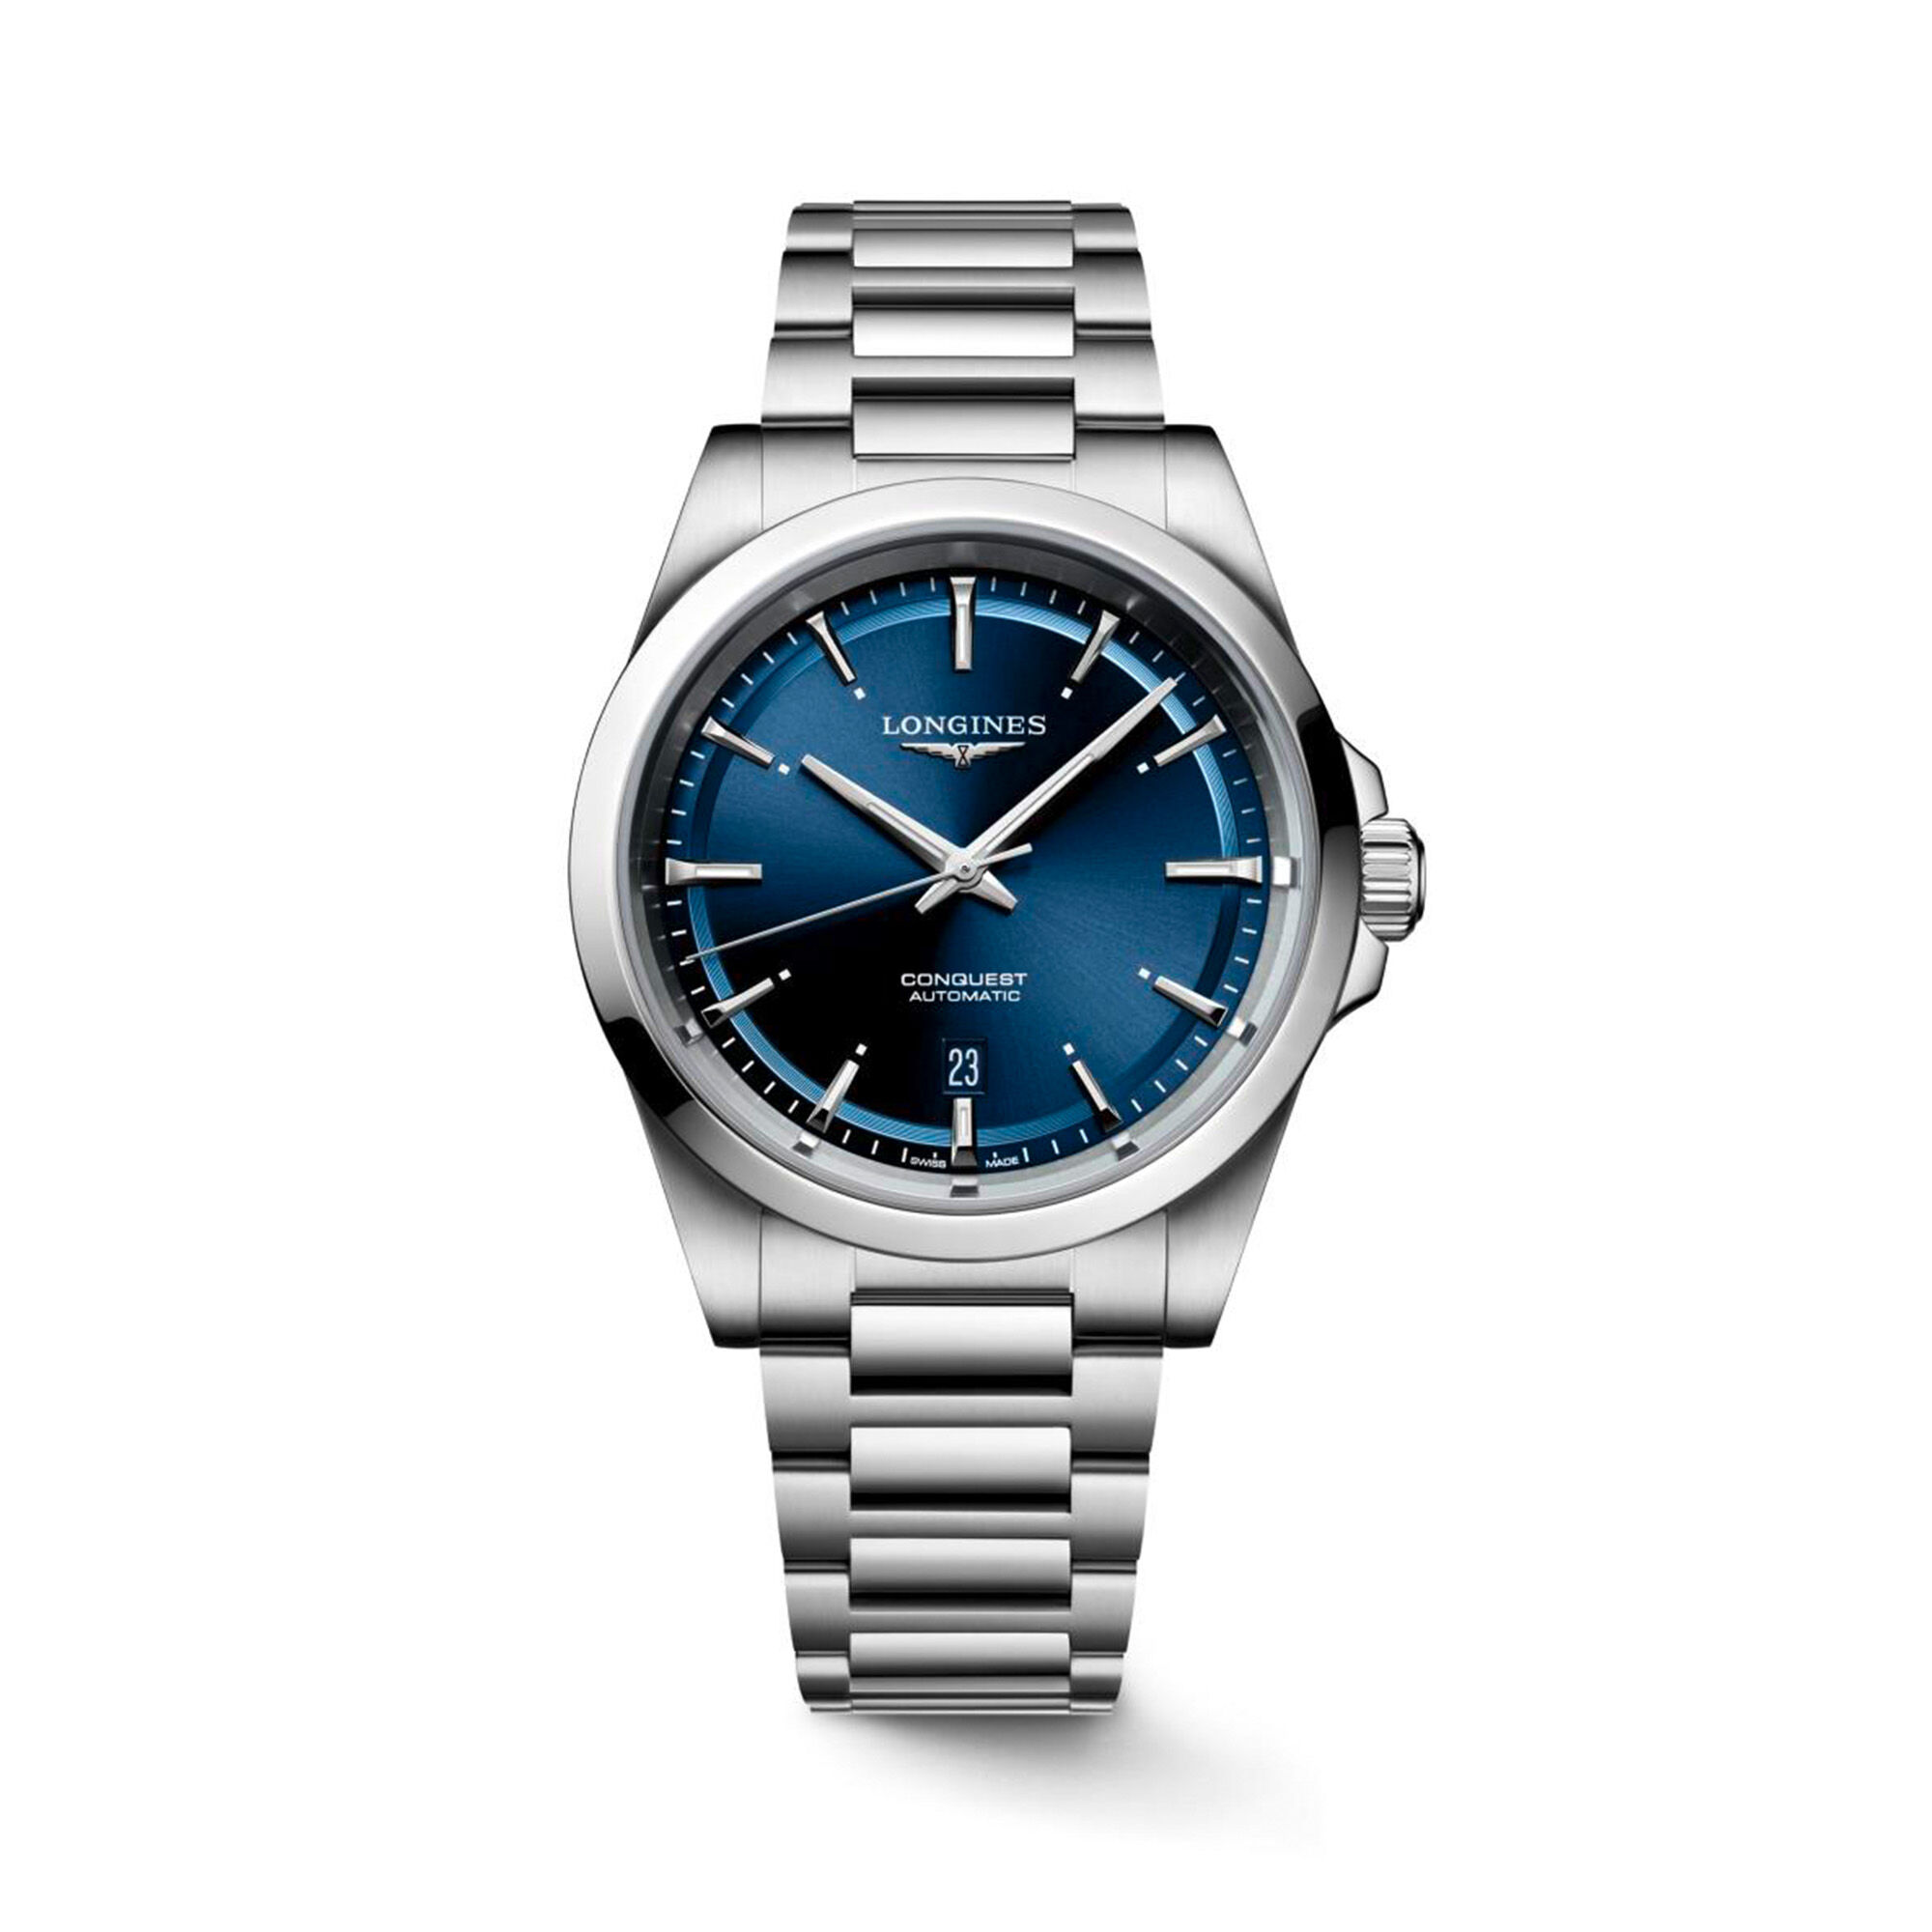 Longines Conquest Automatic 41 mm Stainless Steel | Maison Birks